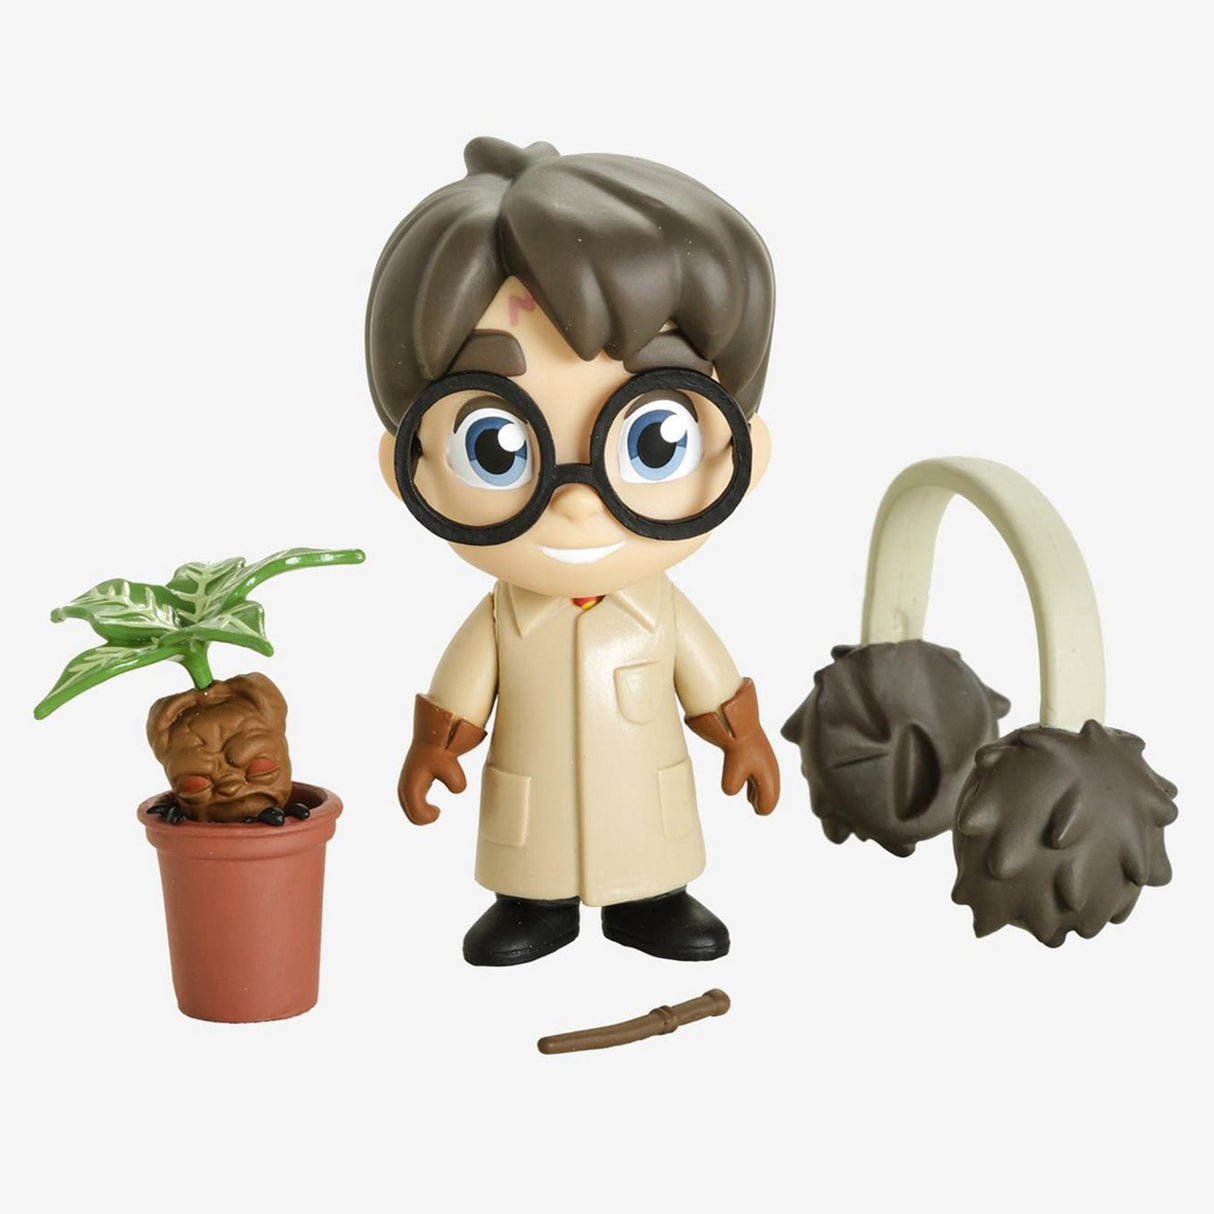 Funko Harry Potter - Harry in Herbology Outfit 5 Star Vinyl Figure (4 inches)